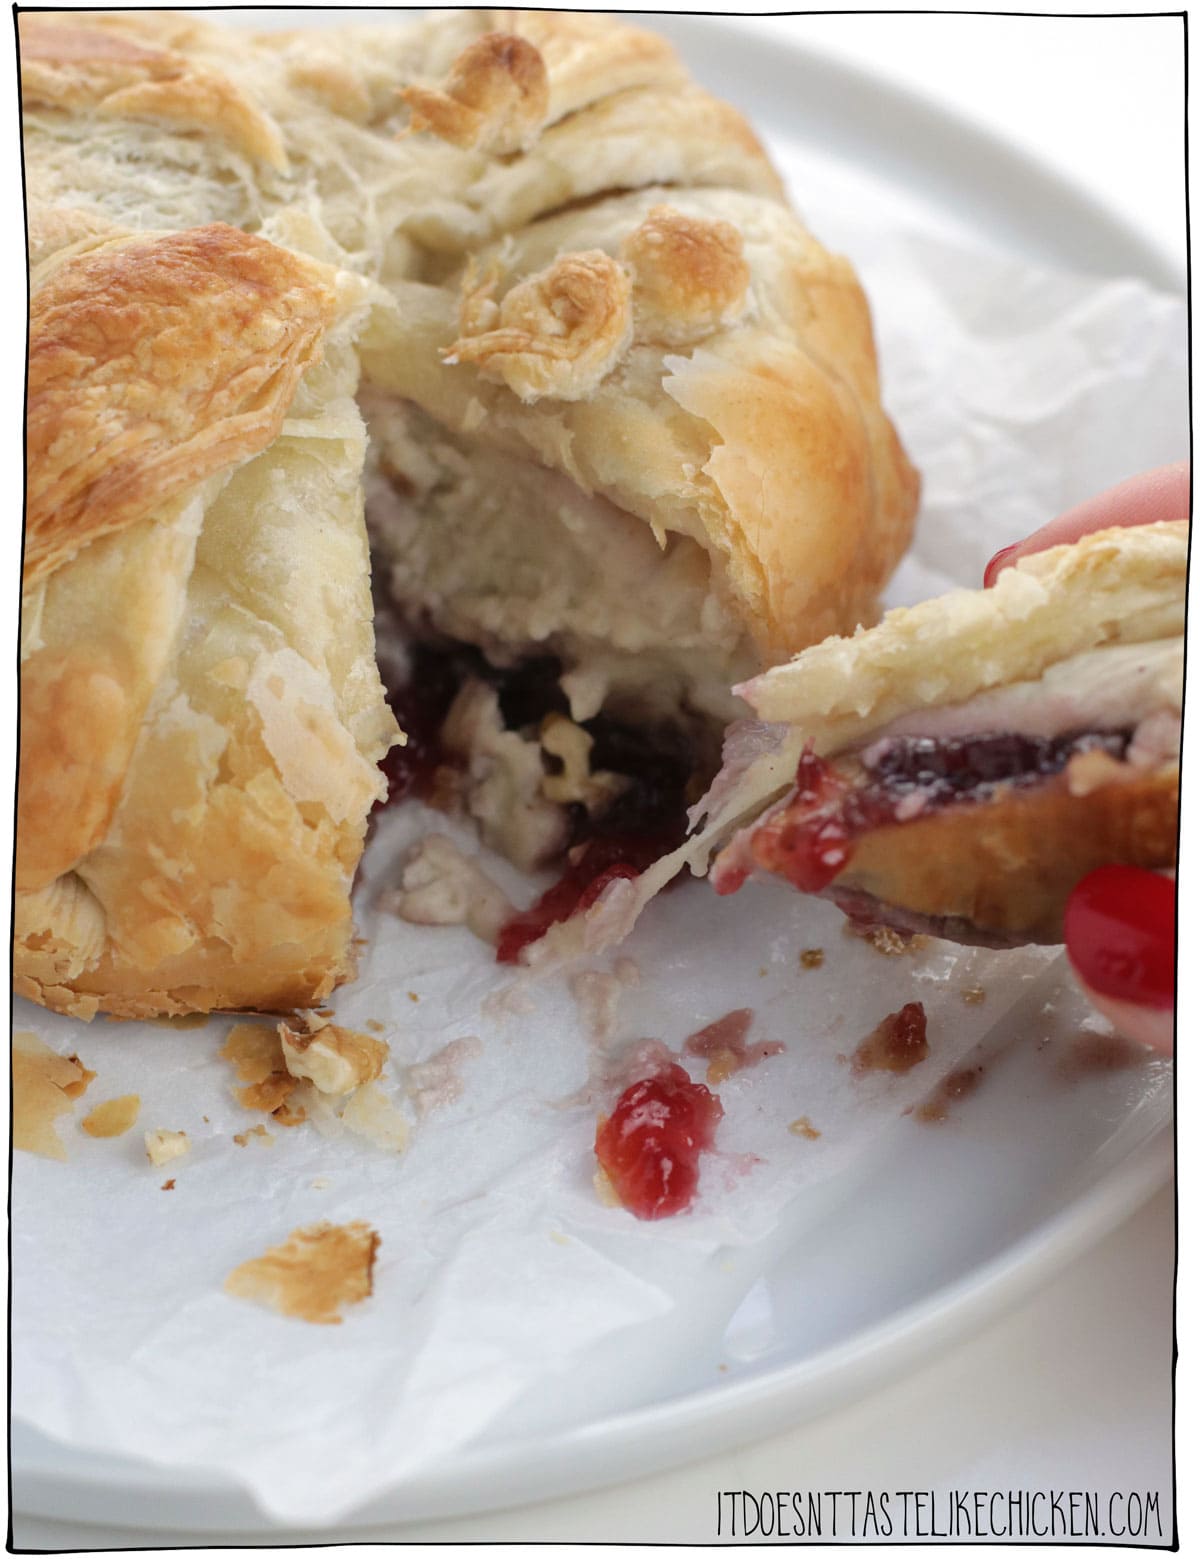 This Vegan Baked Brie in Puff Pastry is the stuff of holiday appetizer dreams!!!! Gooey homemade easy-to-make vegan brie cheese is paired with cranberry sauce, walnuts, and wrapped up in flaky crispy puff pastry. Don't be surprised when this gets gobbled up at lightning speed. The perfect appetizer for Christmas, Thanksgiving, or any holiday party. #itdoesnttastelikechicken #veganappetizer #veganchristmas #vegancheese